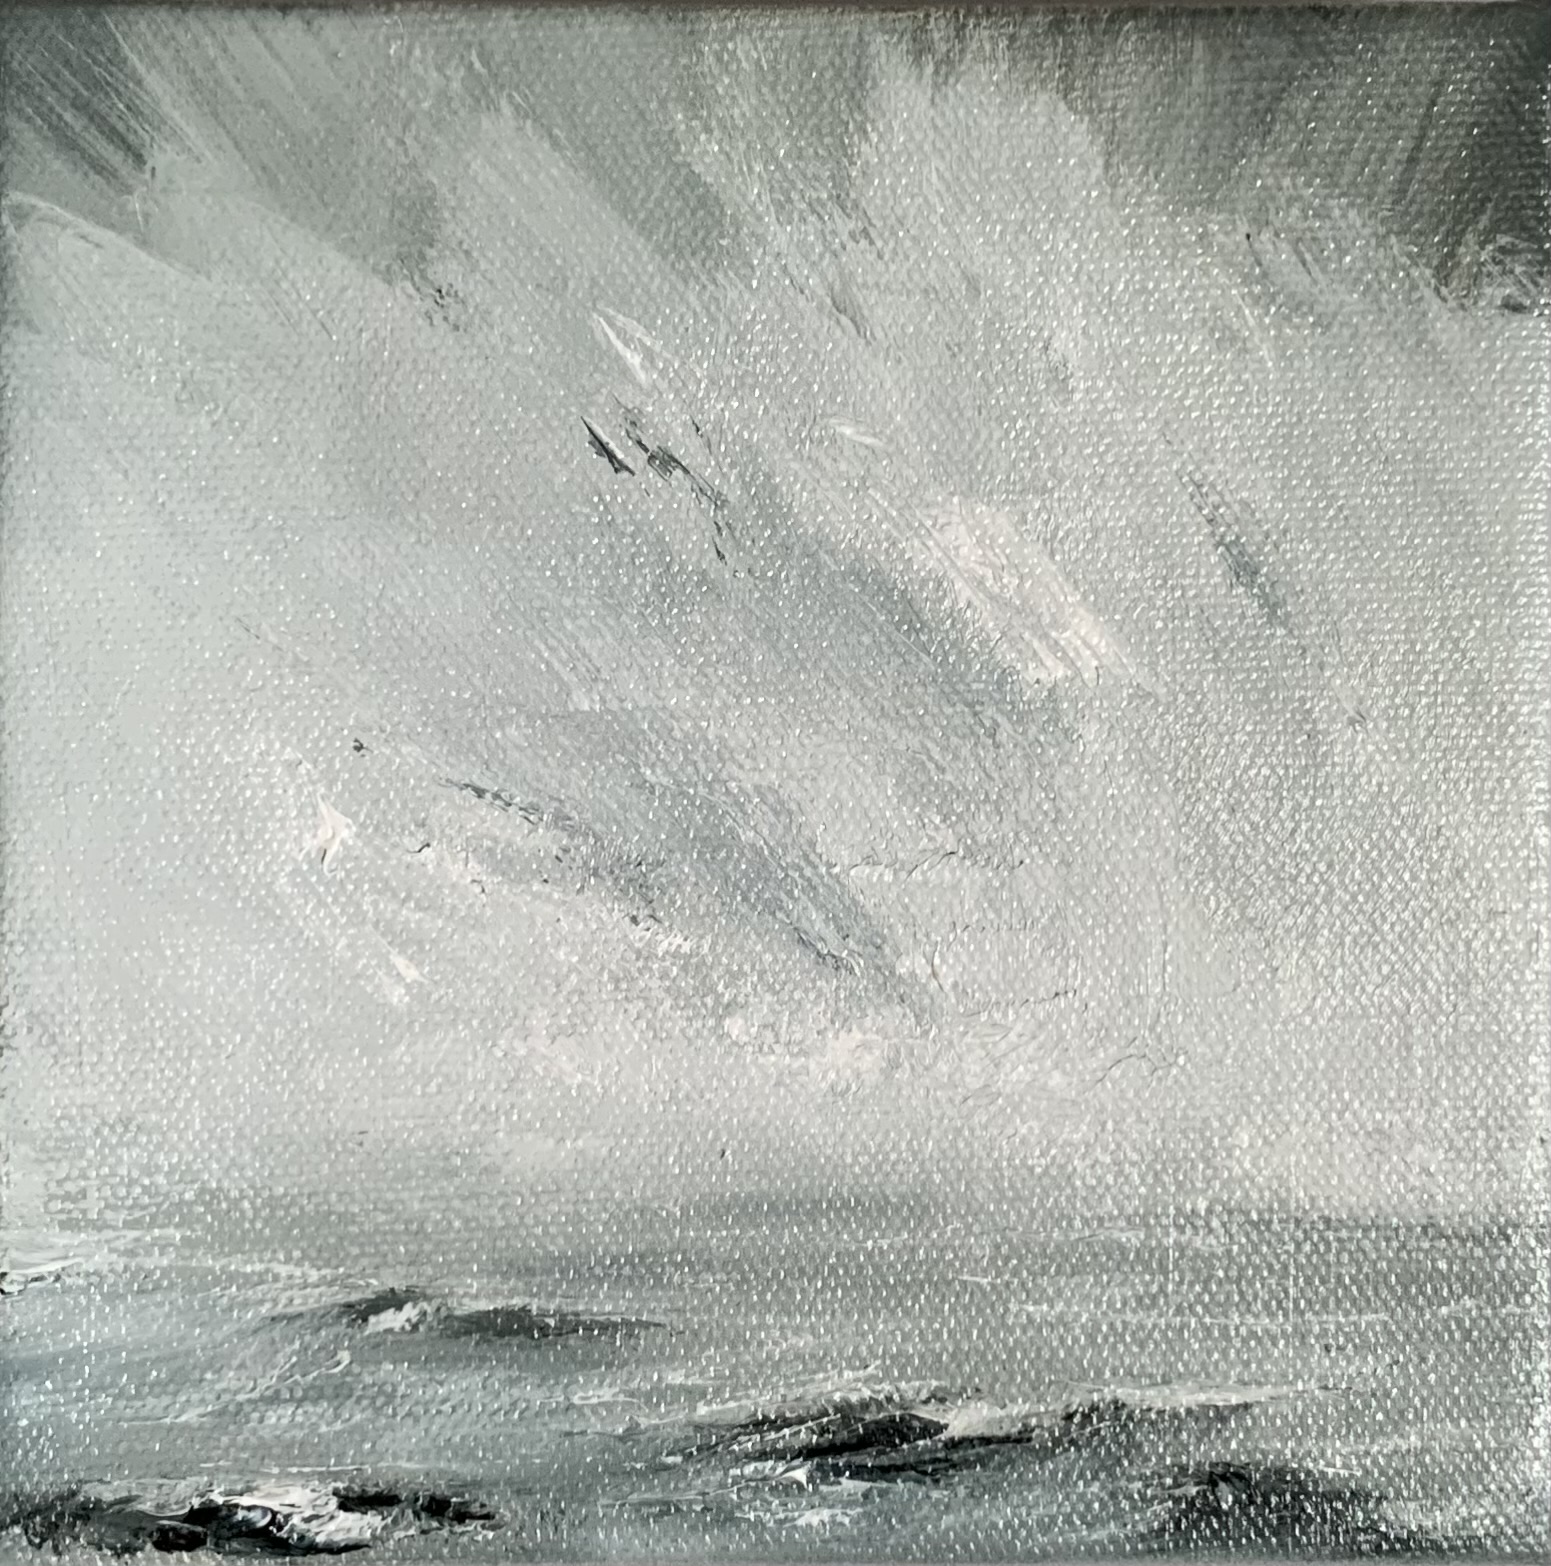 Original seascape oil painting by Tisha Mark, "Wintry Seas No. 4" 6"x6" oil on canvas (2024). Wintertime sea and sky, painted in a limited palette of grays, blue, browns, black, and white.